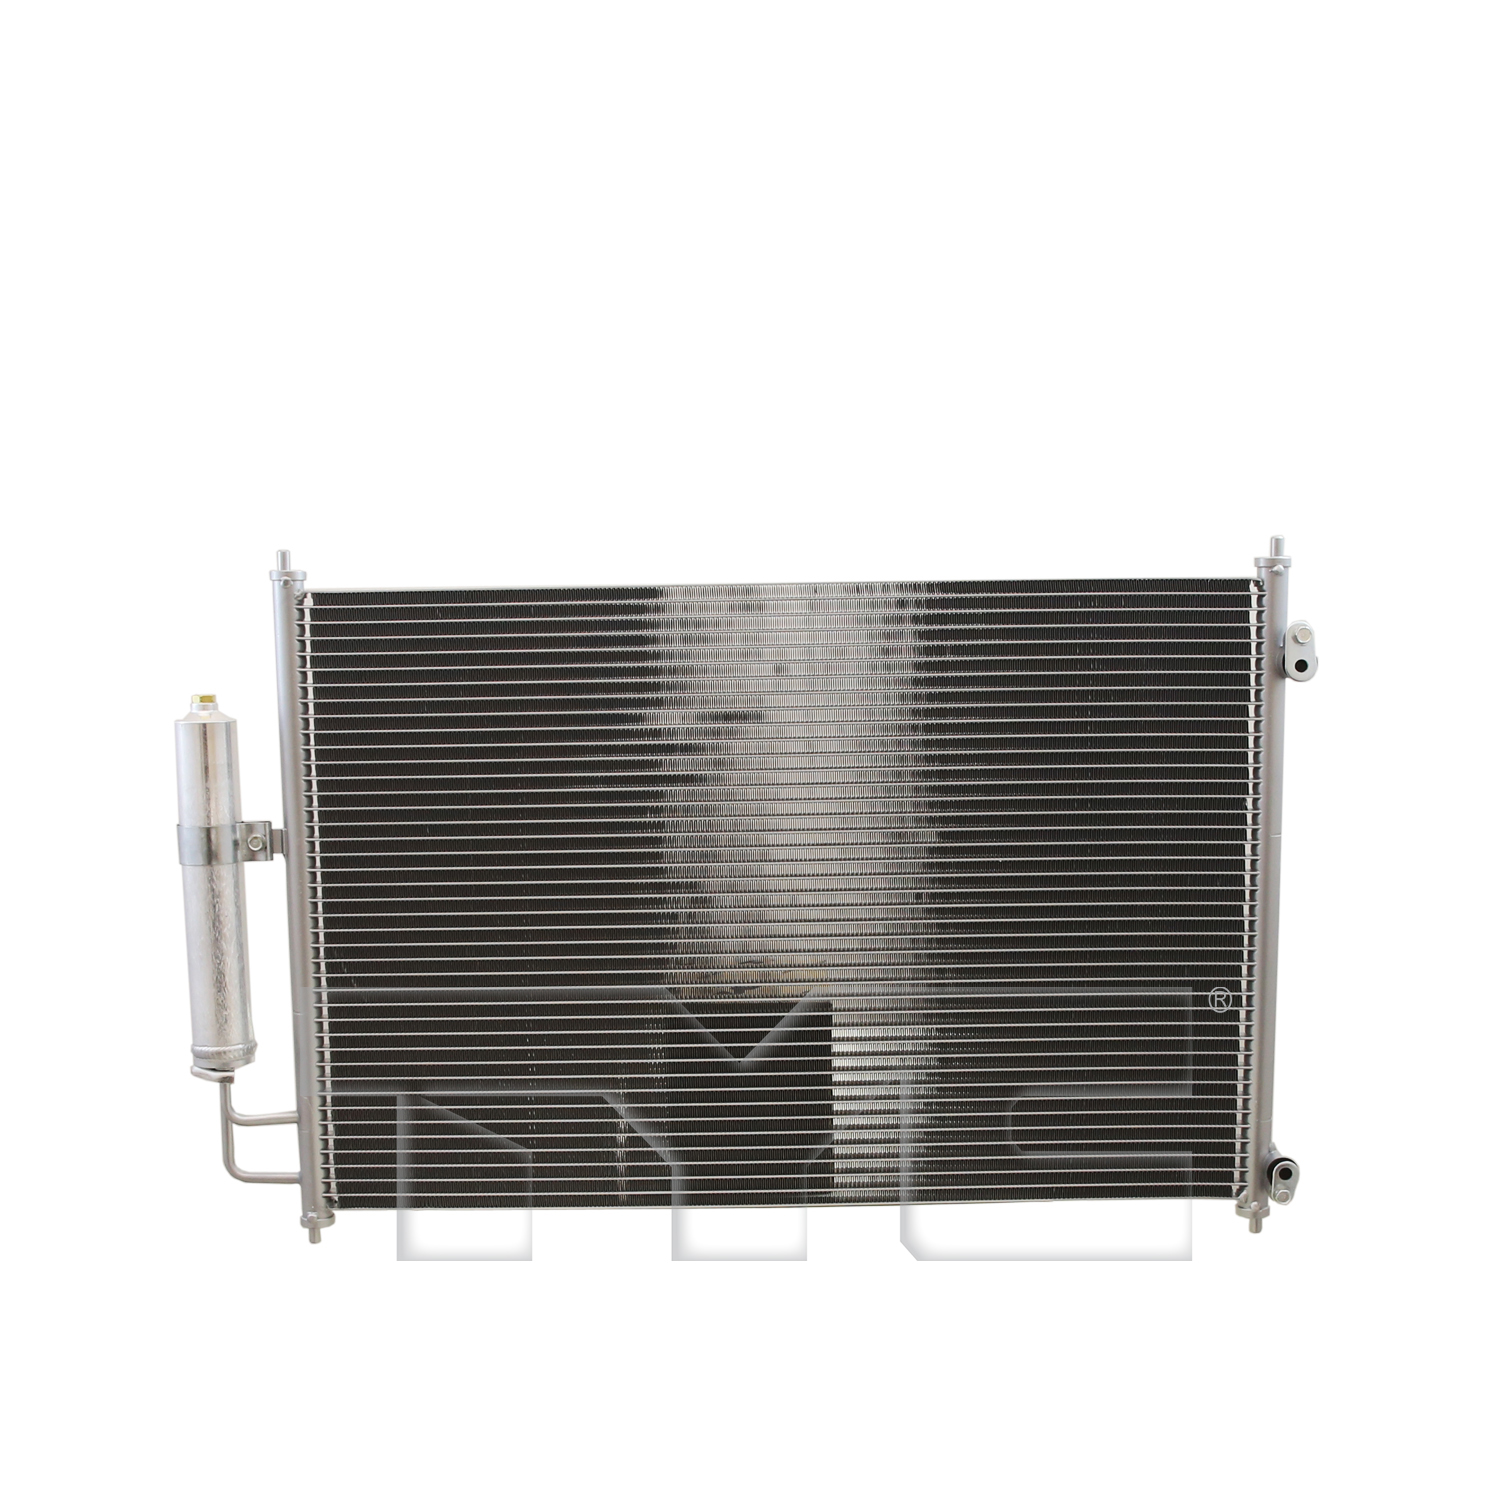 Aftermarket AC CONDENSERS for NISSAN - ROGUE, ROGUE,08-13,Air conditioning condenser